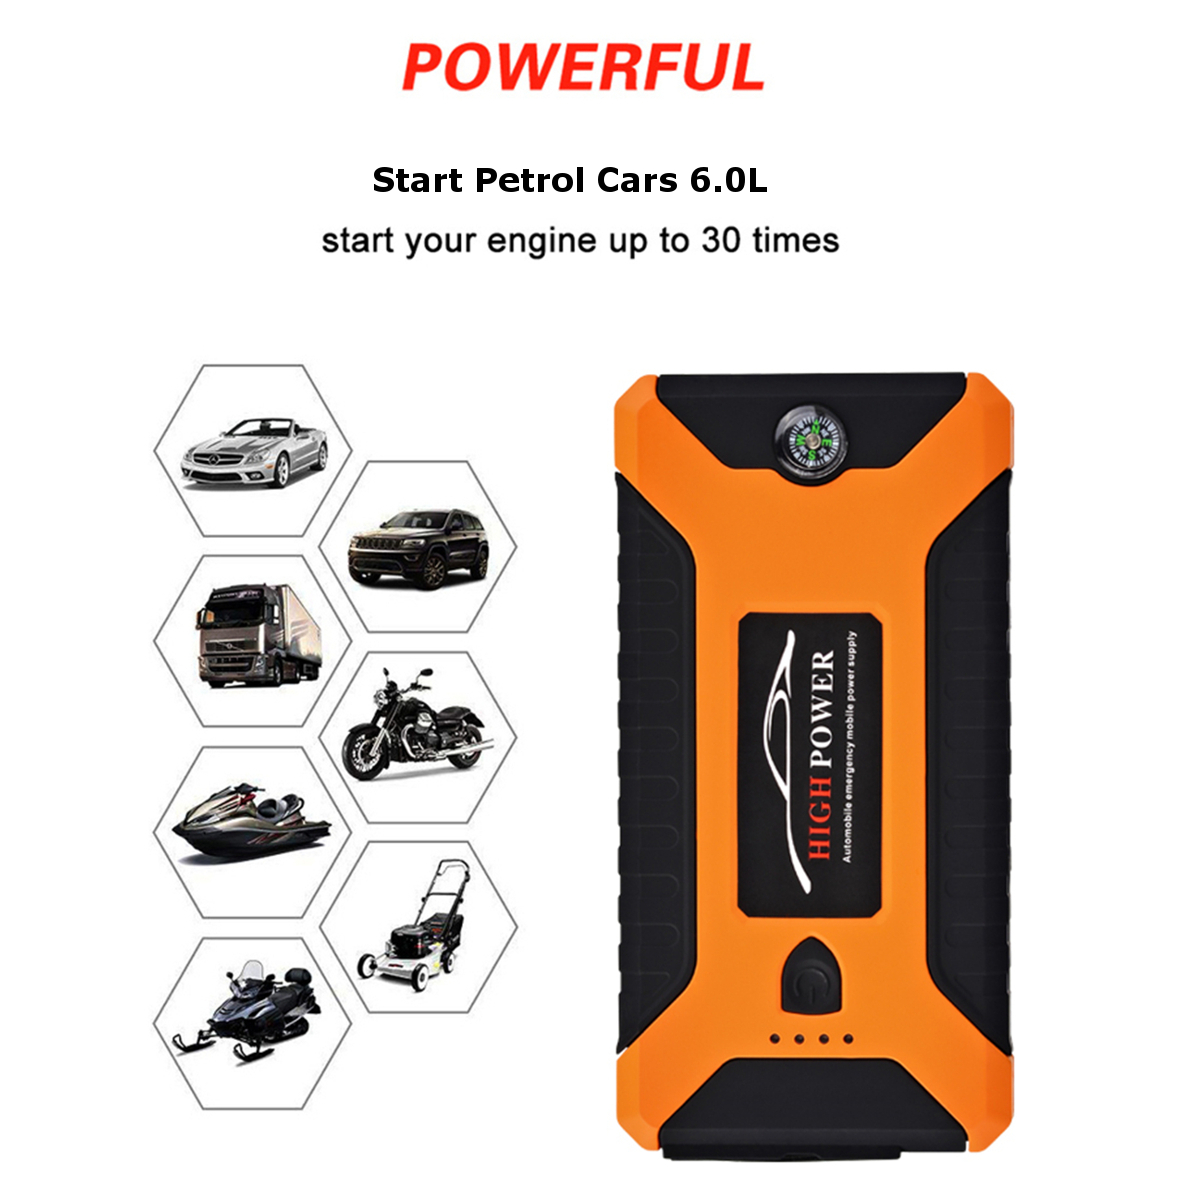 JX27-88000mAh-4USB-Car-Jump-Starter-Pack-Booster-Multifunction-Emergency-Power-Supply-Starter-Charge-1381251-6